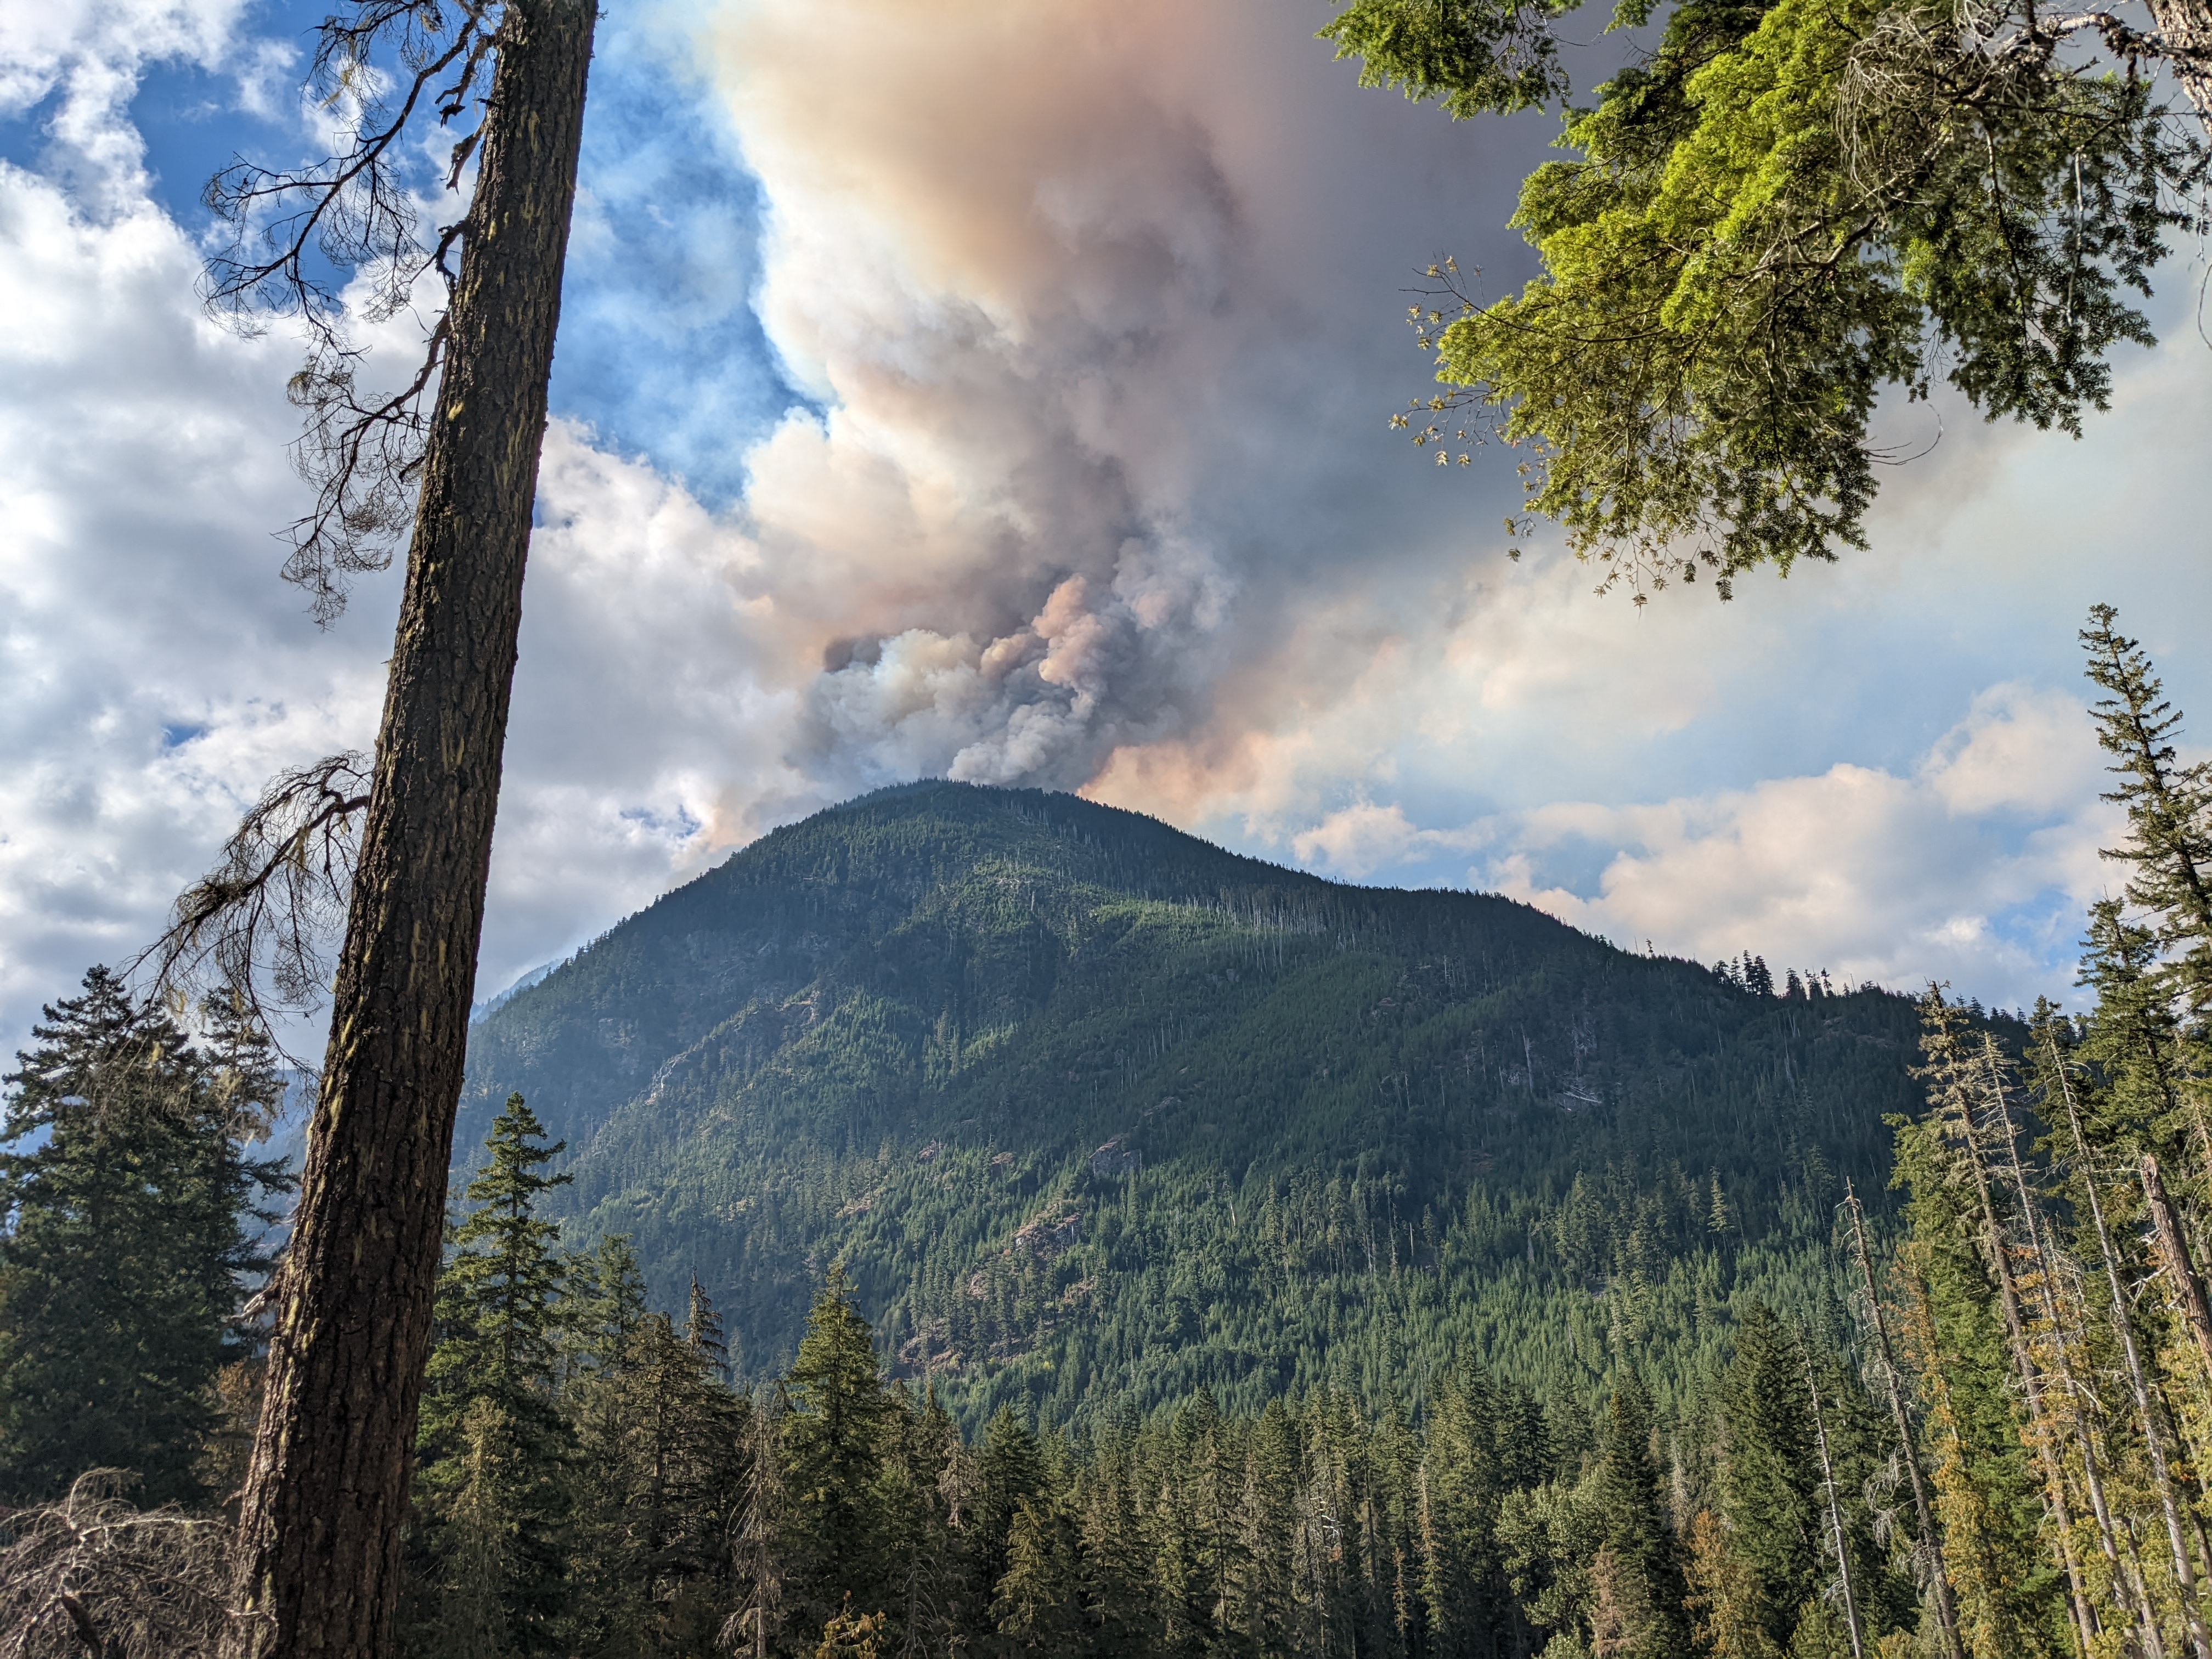 Smoke column rises above a mountain with trees in the foreground